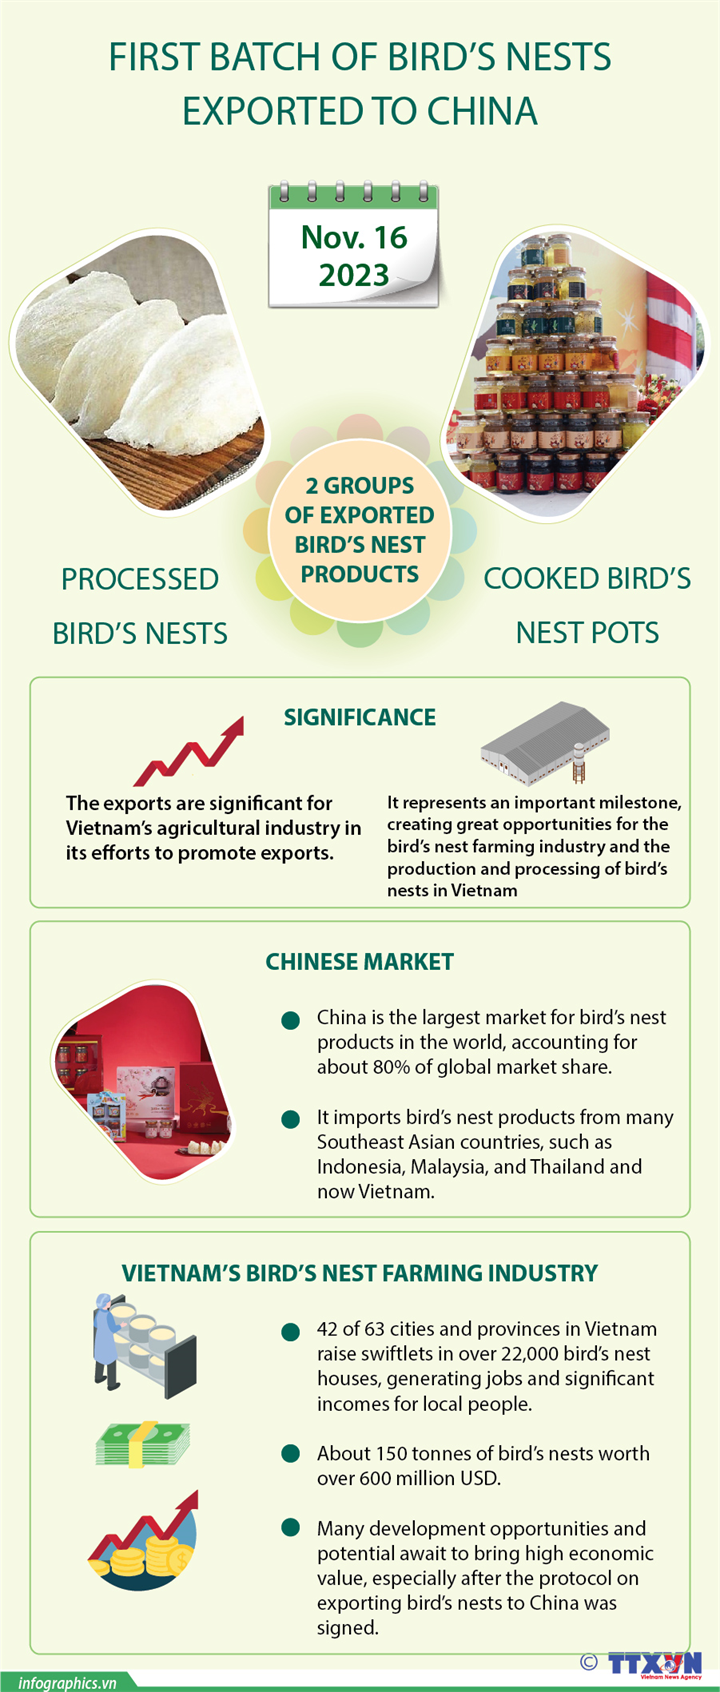 First batch of bird’s nest products exported to China